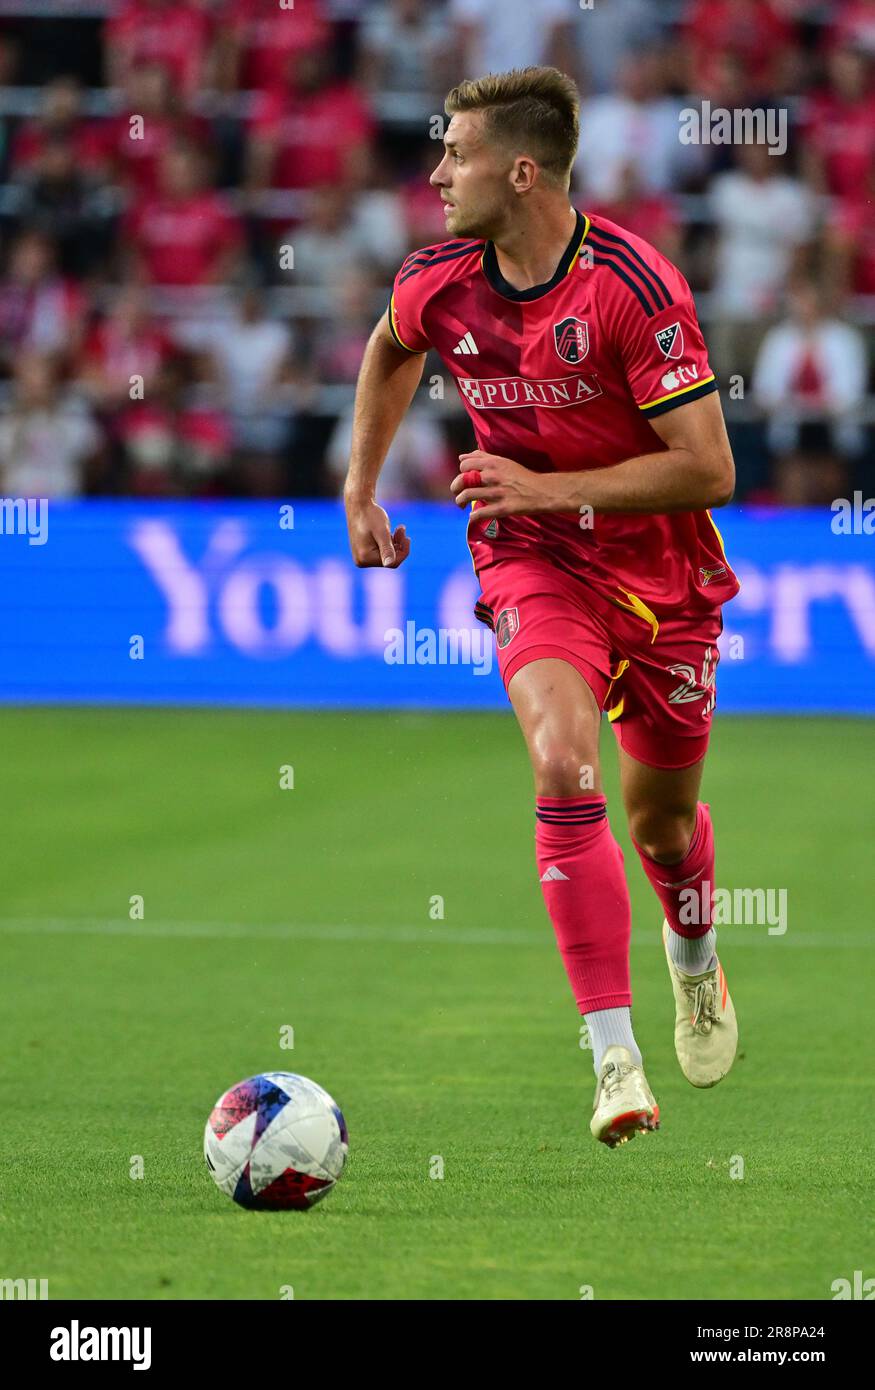 St. Louis City defender Lucas Bartlett (24) moves the ball downfield. STL City played Real Salt Lake in a Major League Soccer game on June 21, 2023 at CITY Park Stadium in St. Louis, MO, USA.   Photo by Tim Vizer/Sipa USA Stock Photo